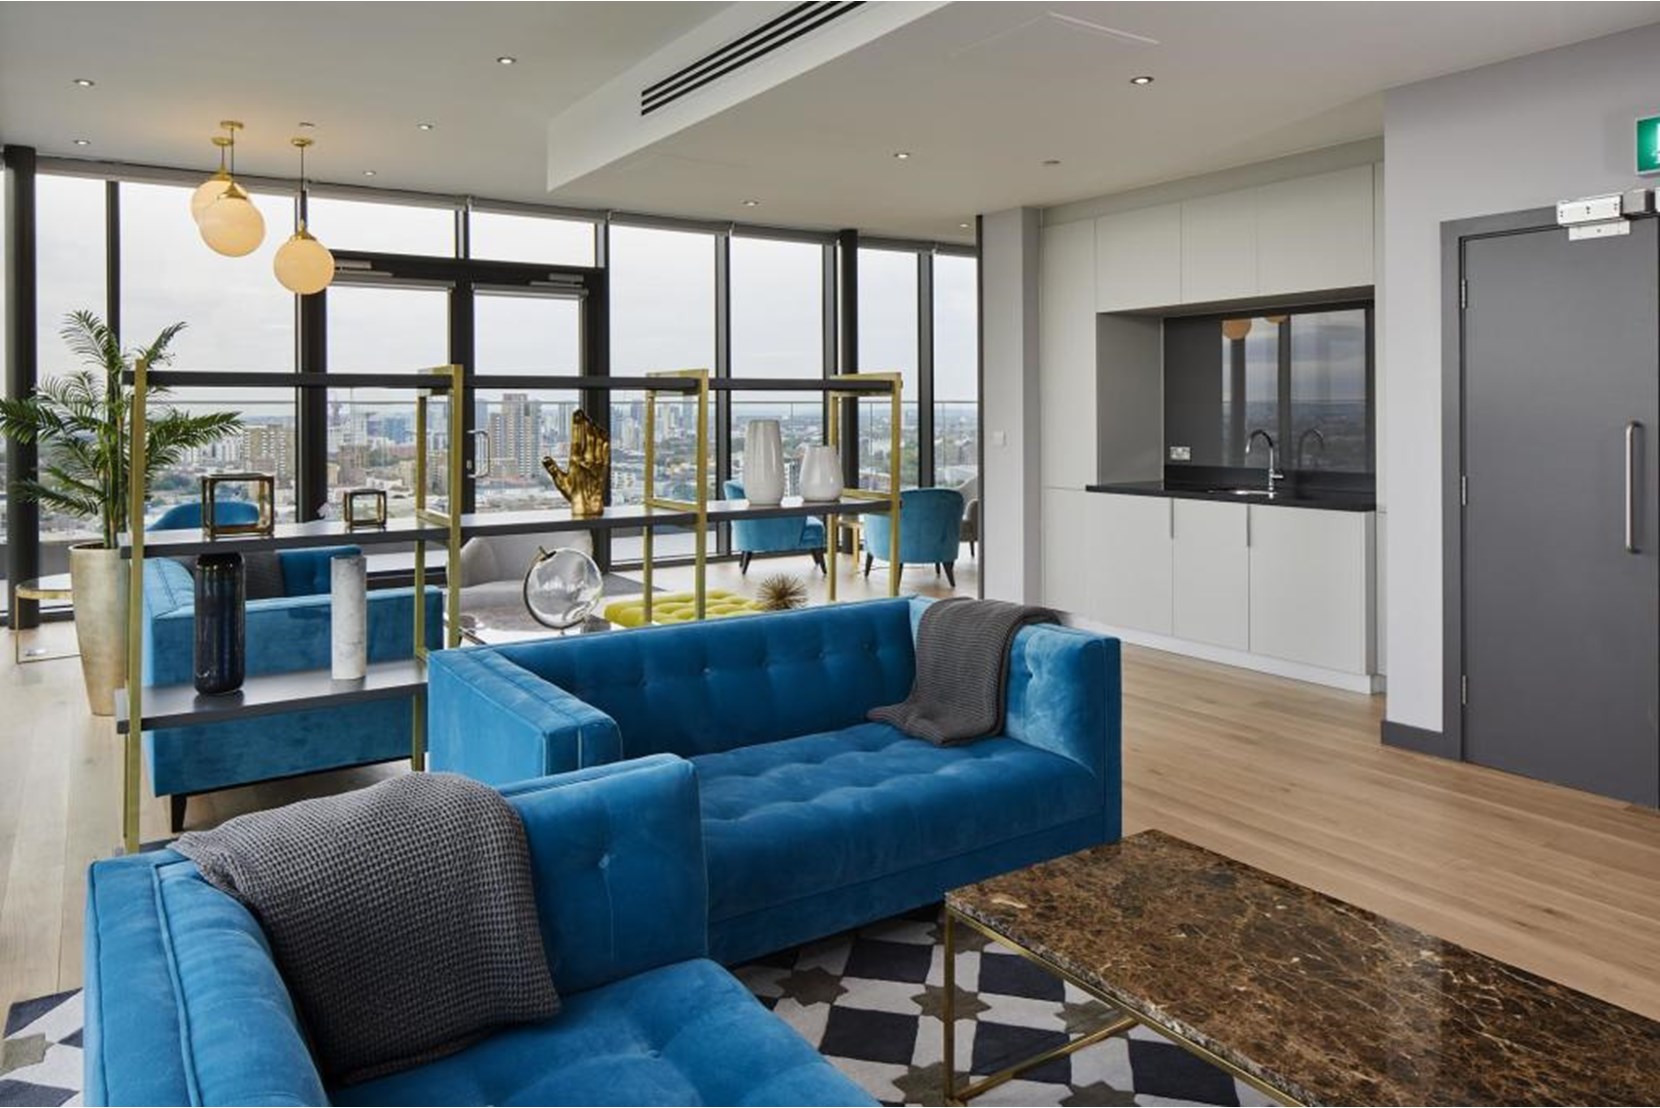 Apartments to Rent by Savills at The Highline, Tower Hamlets, E14, communal lounge area